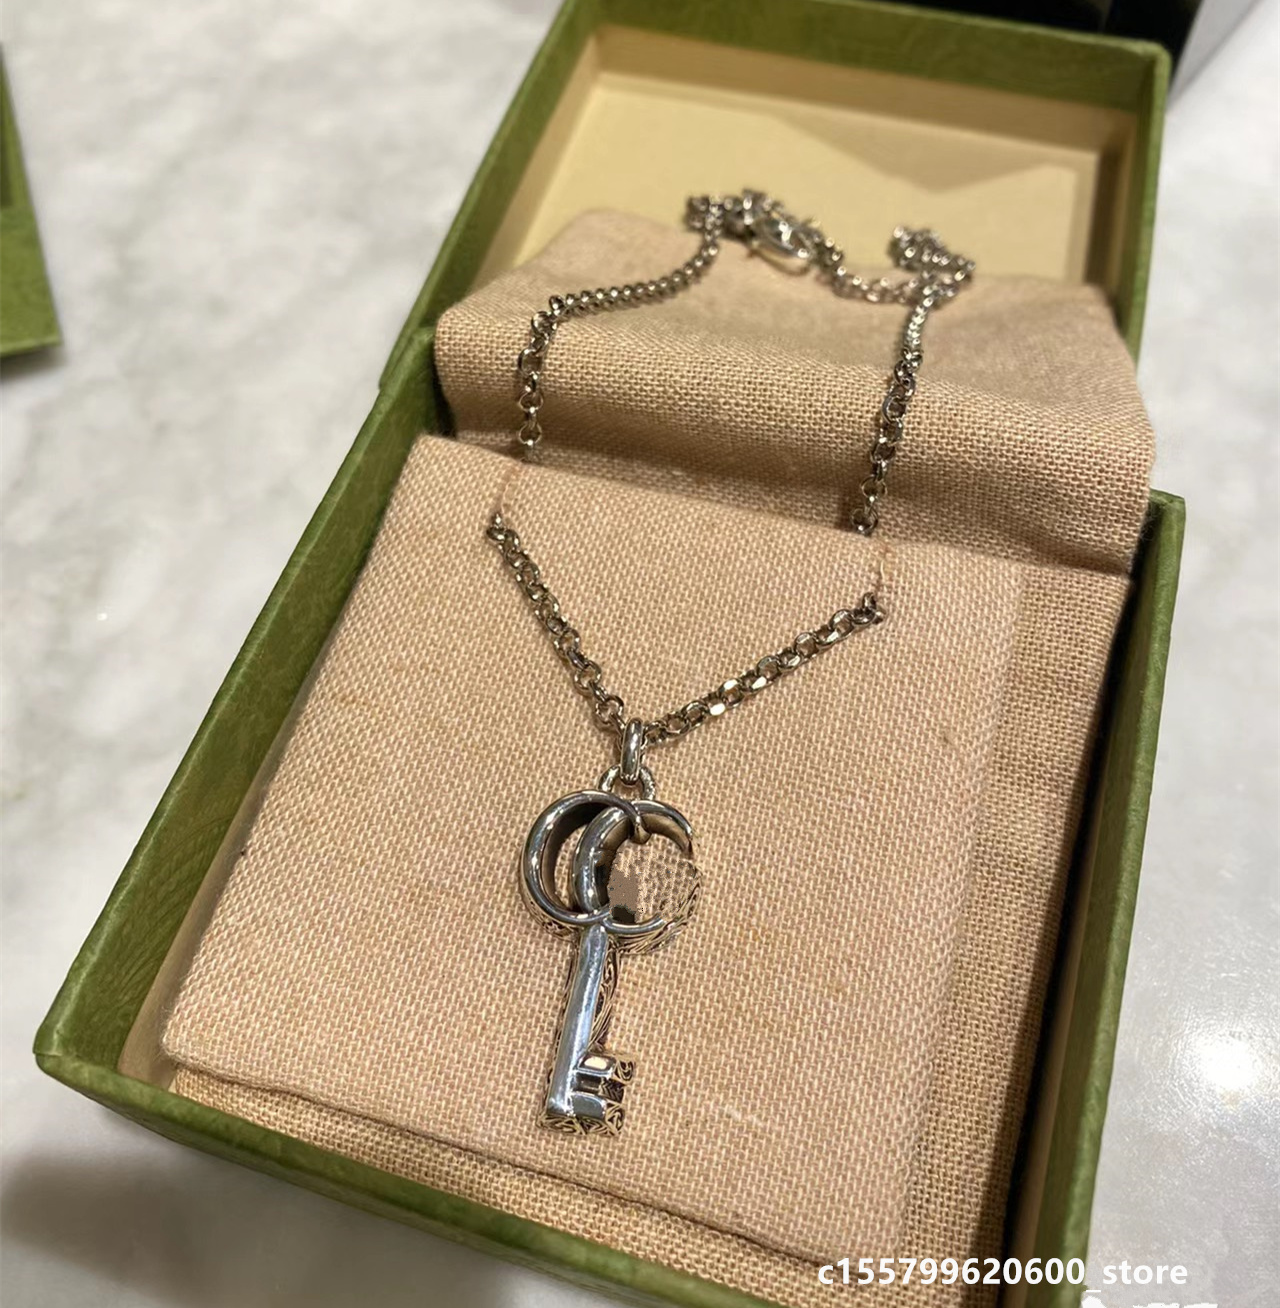 925 sterling Silver Luxury designer key Pendant Necklaces Chain For Woman Men Fashion Wedding Charm Ghost Jewelry G double Birthday Gift Accessories Marmont Van